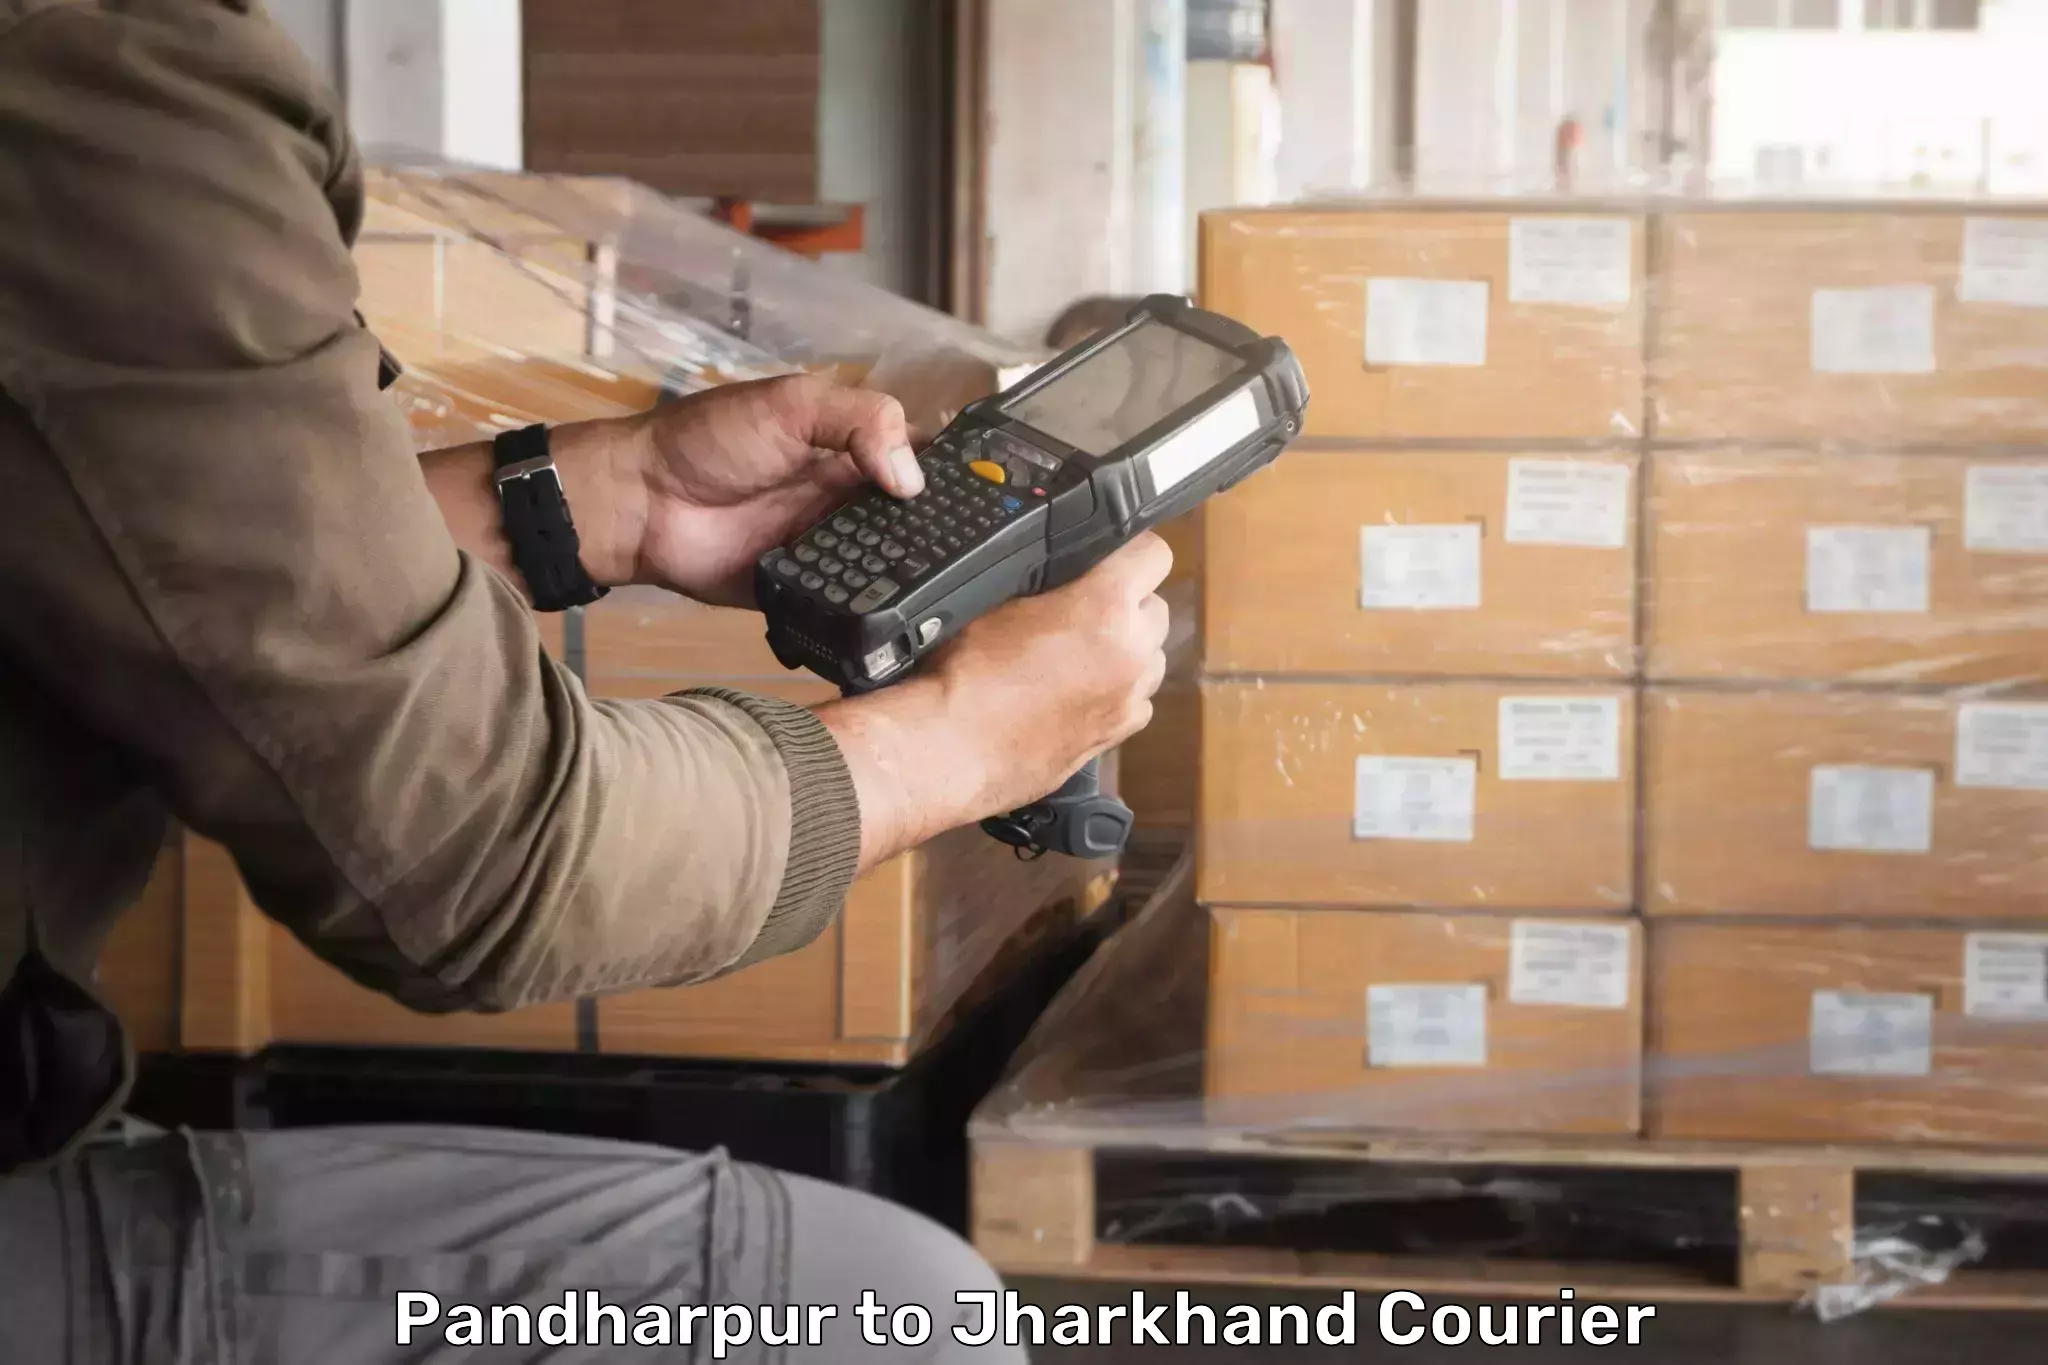 User-friendly delivery service Pandharpur to Nirsa